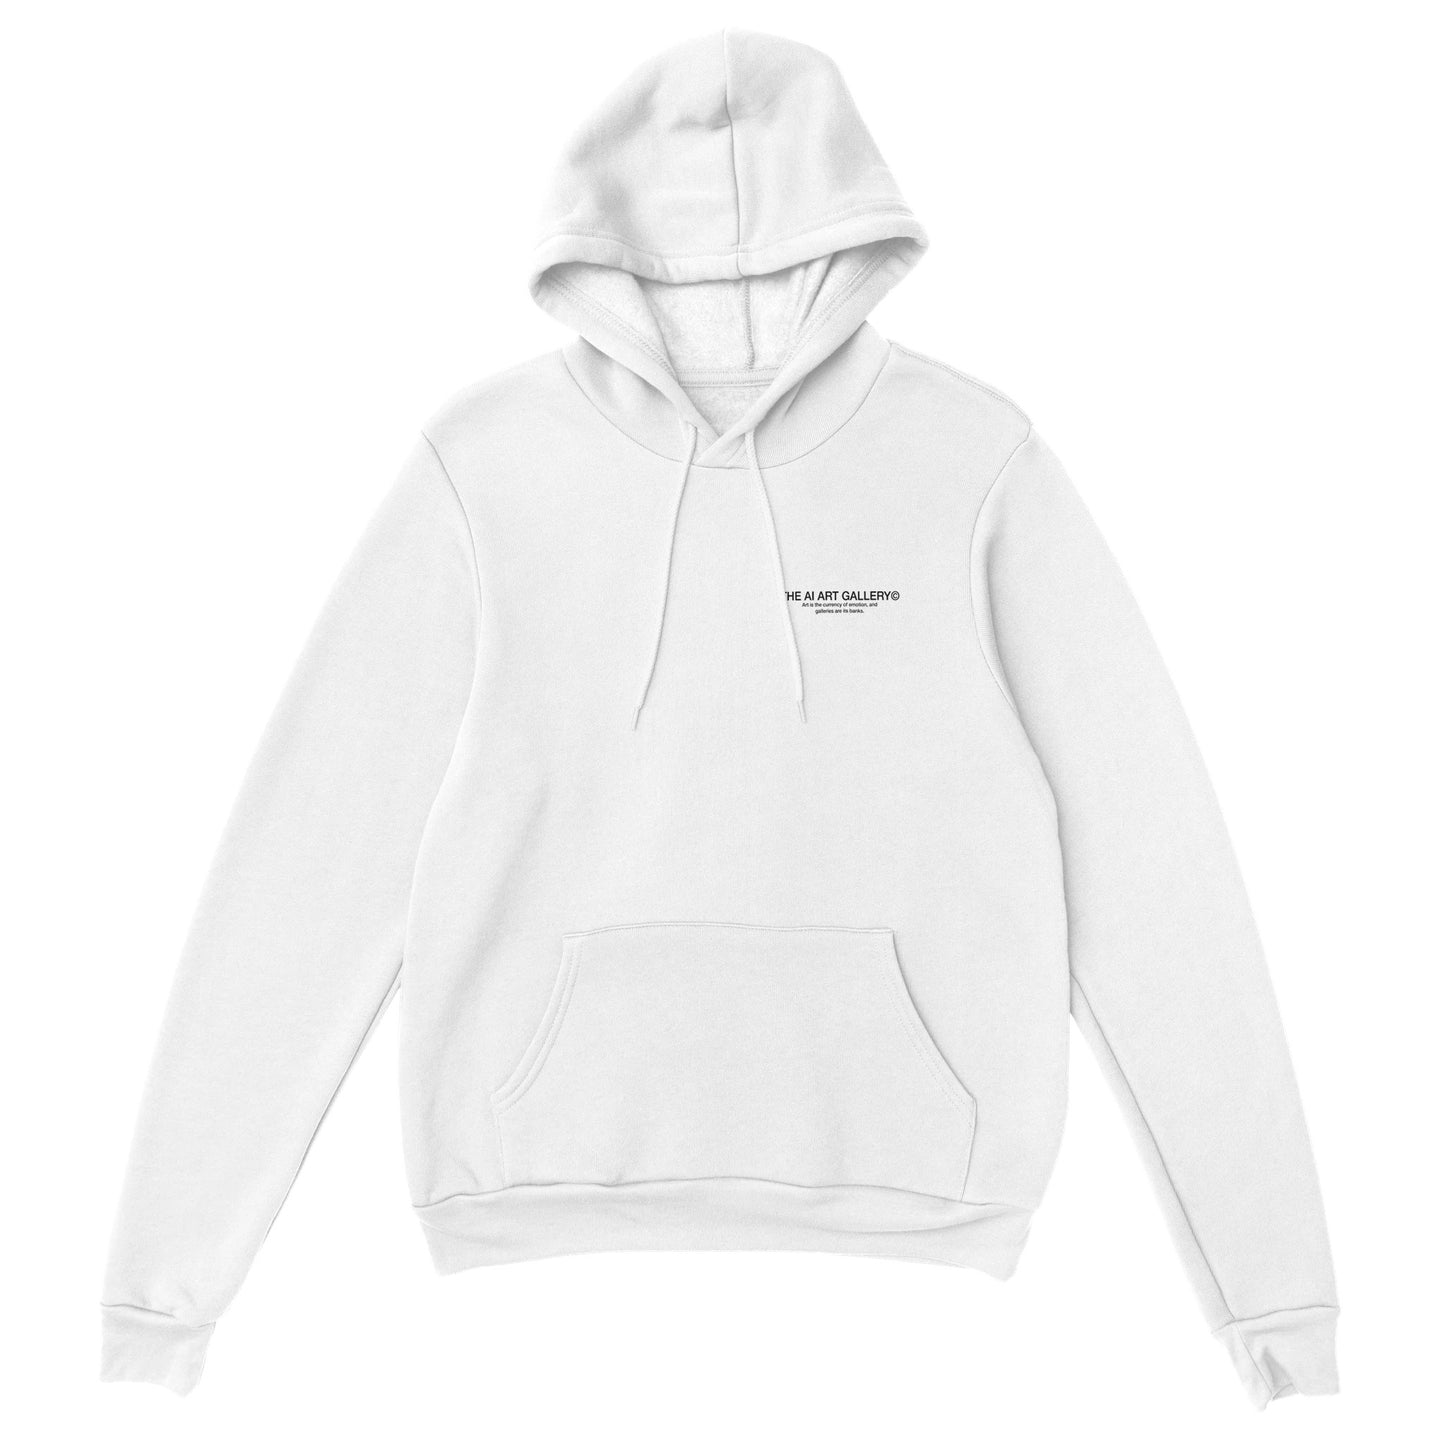 NEED MONEY FOR A PICASSO / Hoodie / White